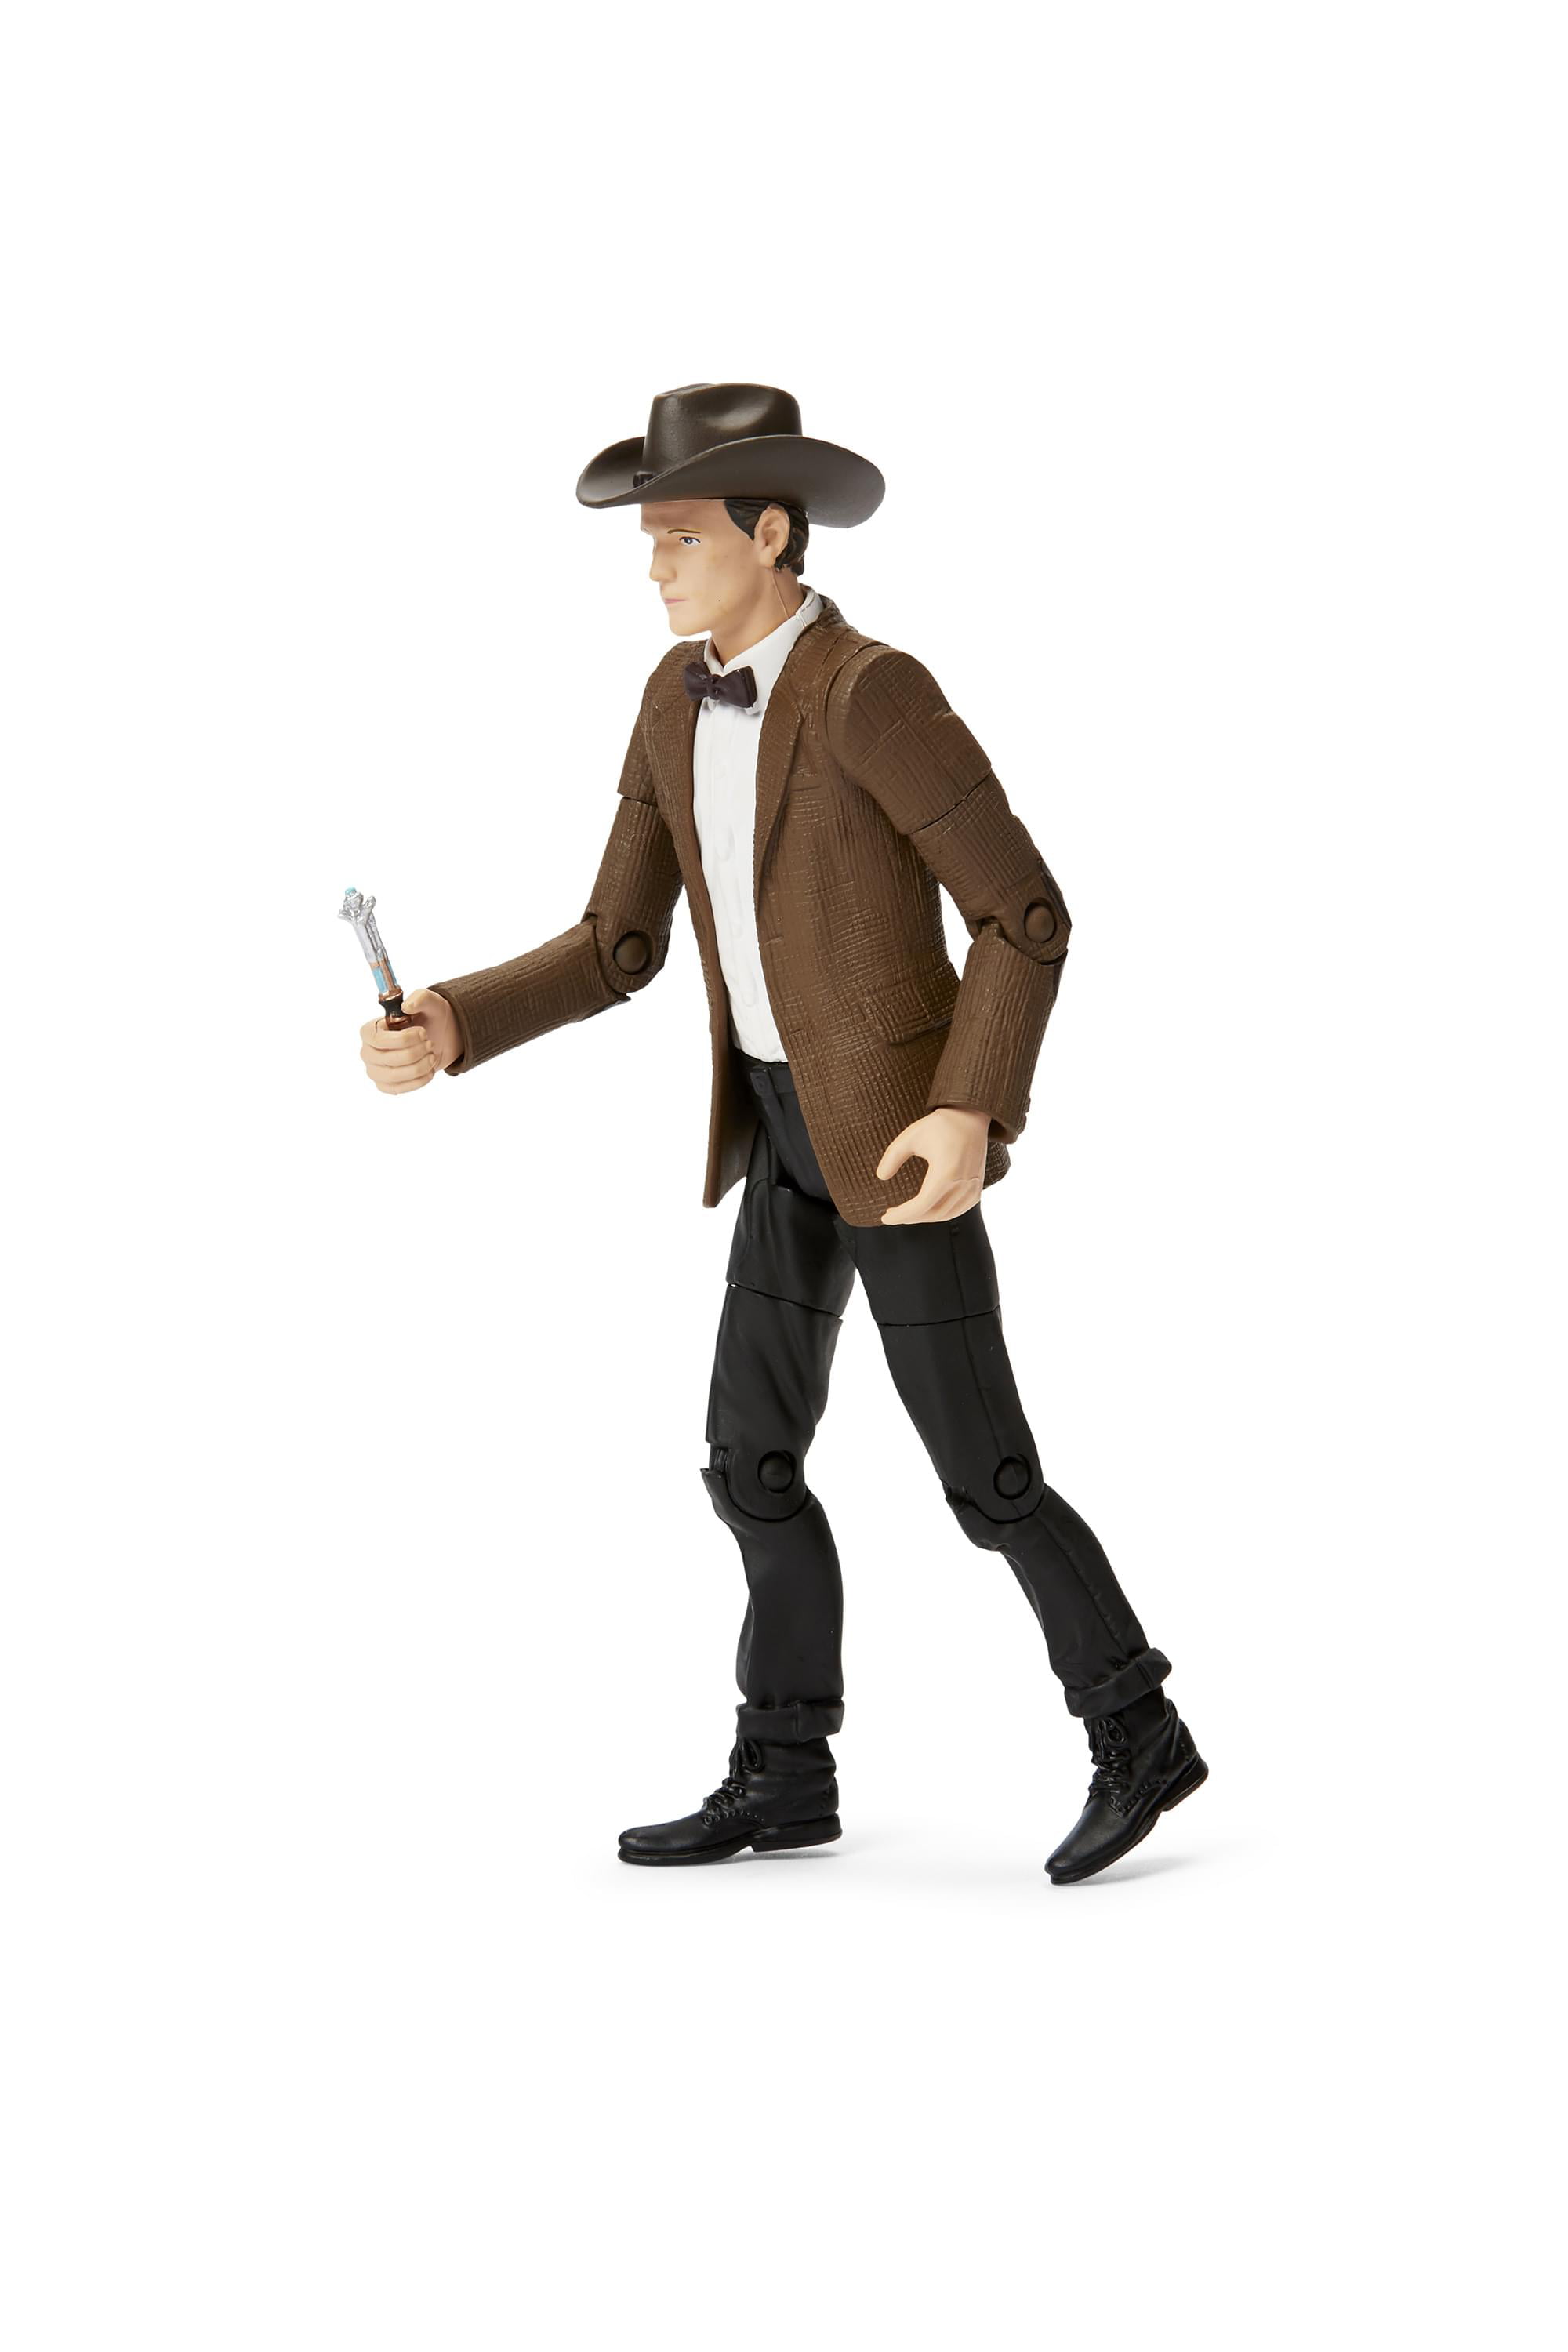 Doctor Who Series 6 11th Doctor With Cowboy Hat action figure 5.5" old #dh4 